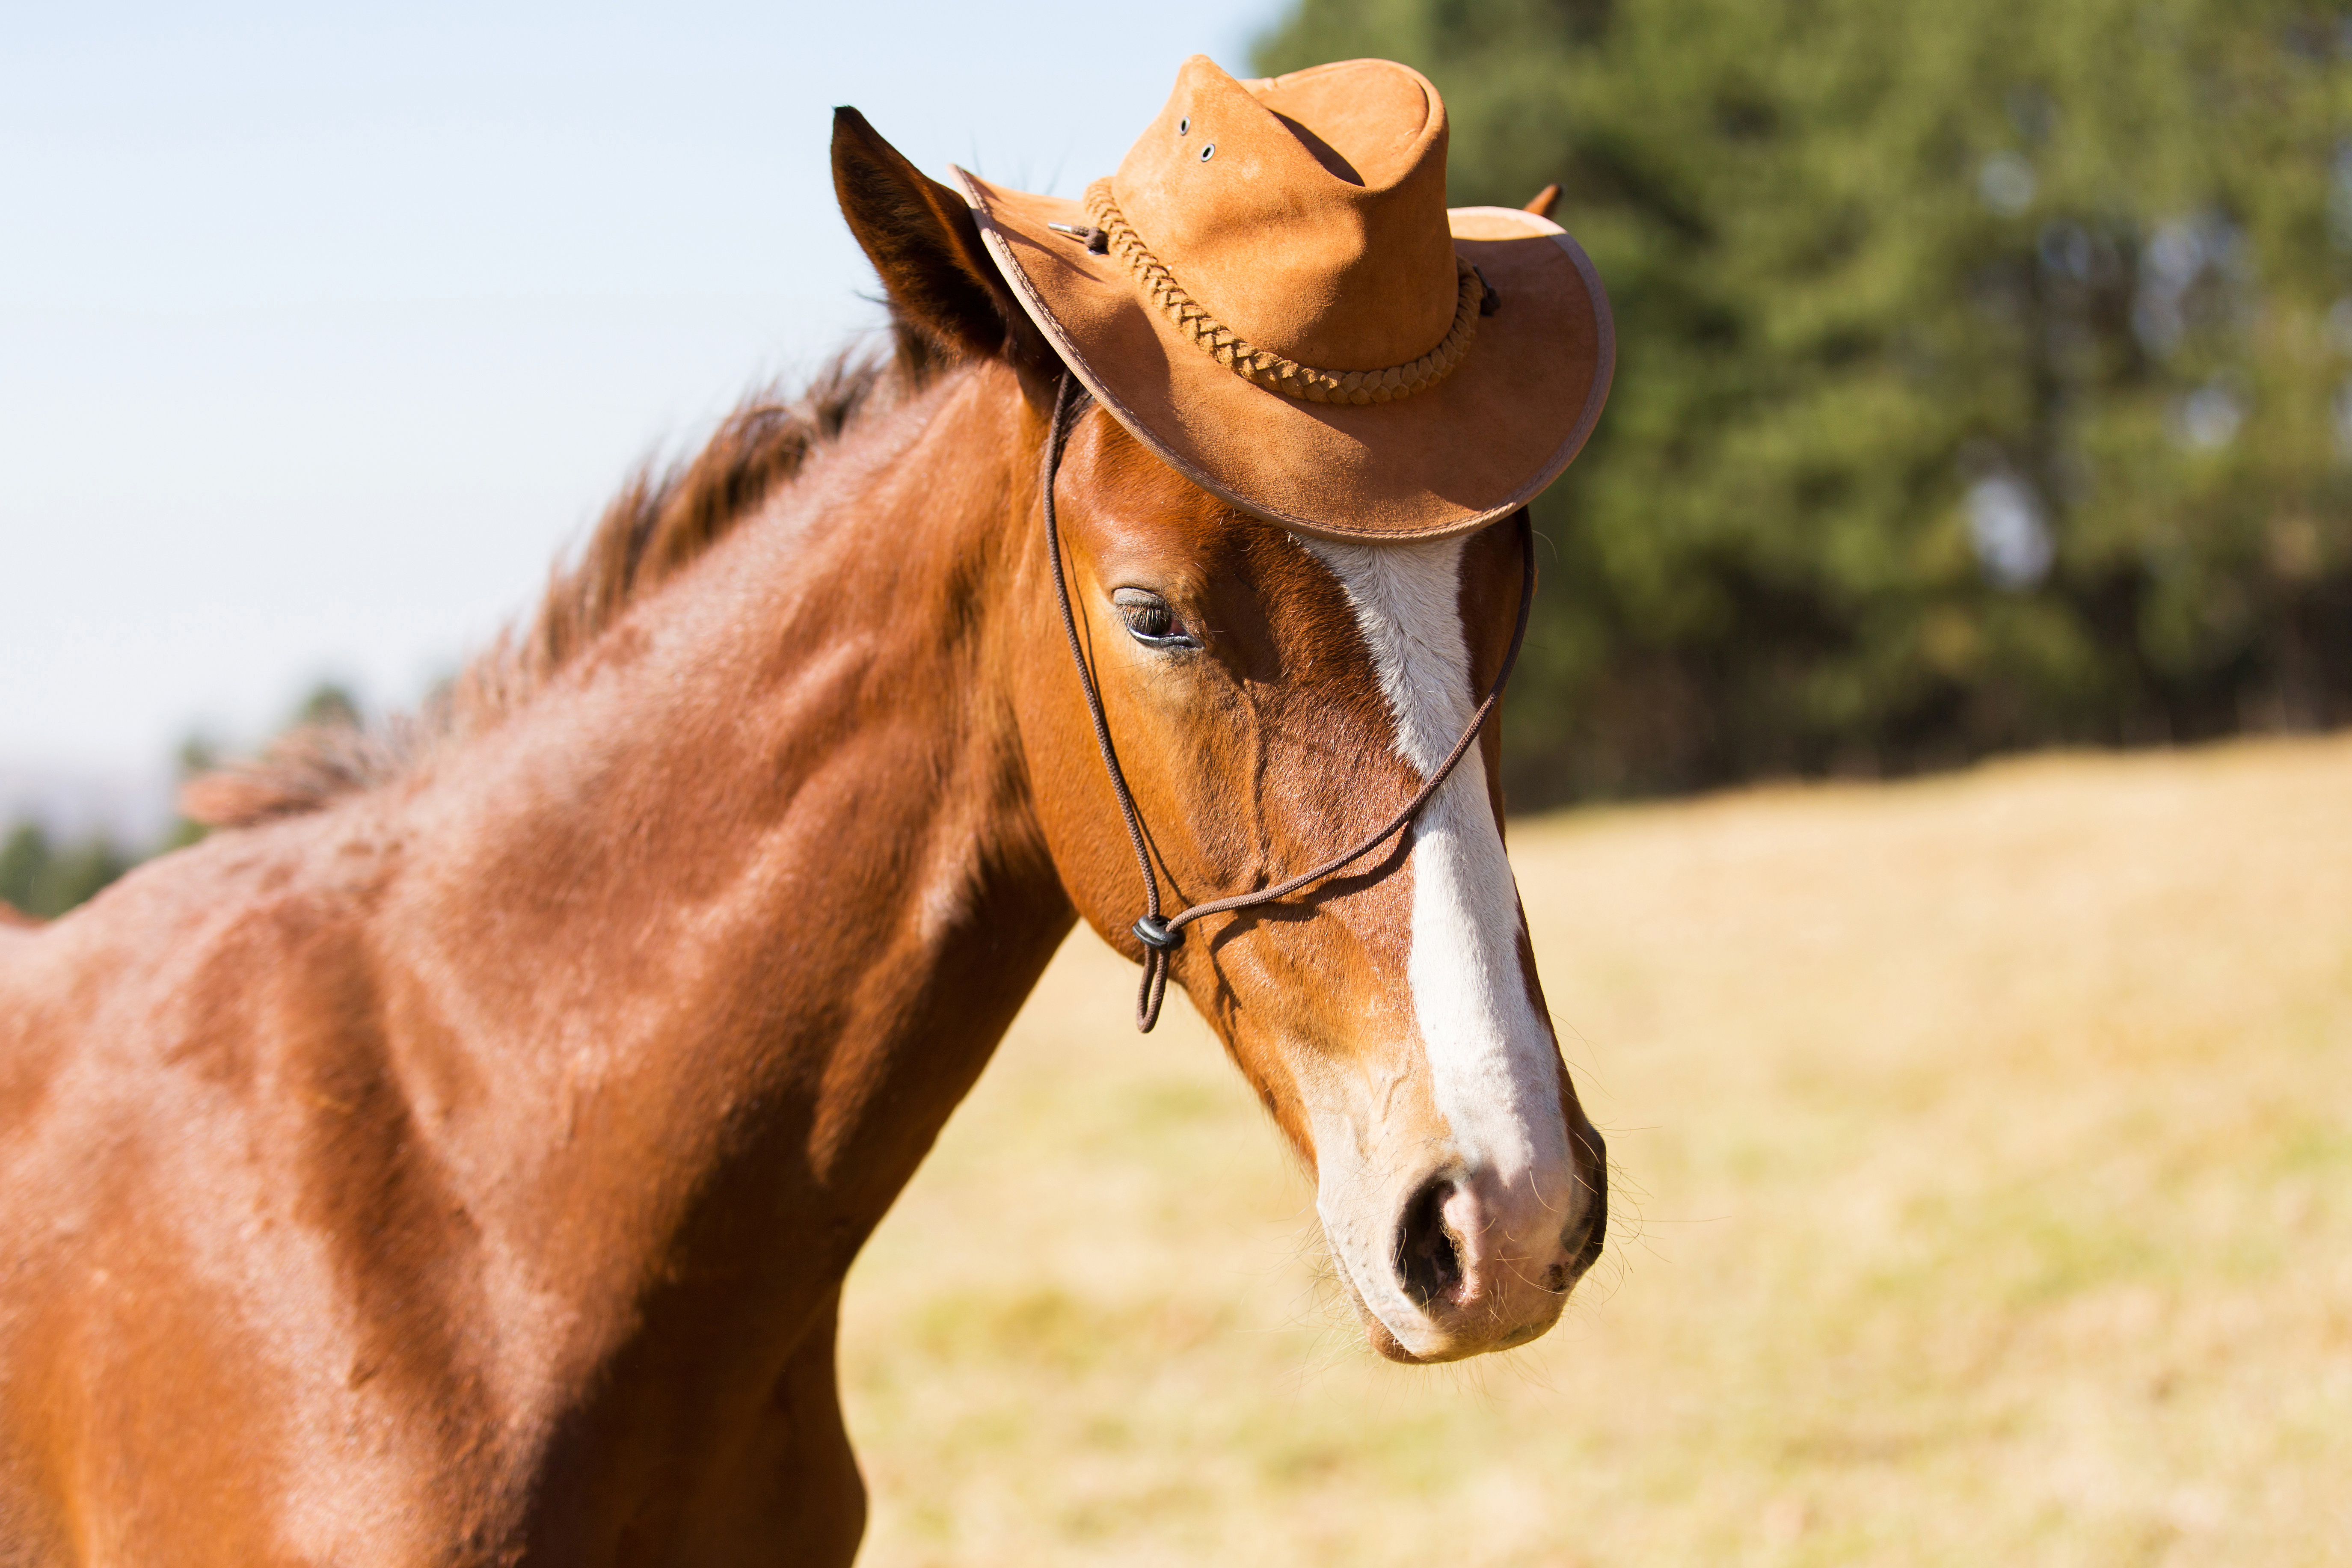 5 Tips for Taking Better Pictures of Your Horse